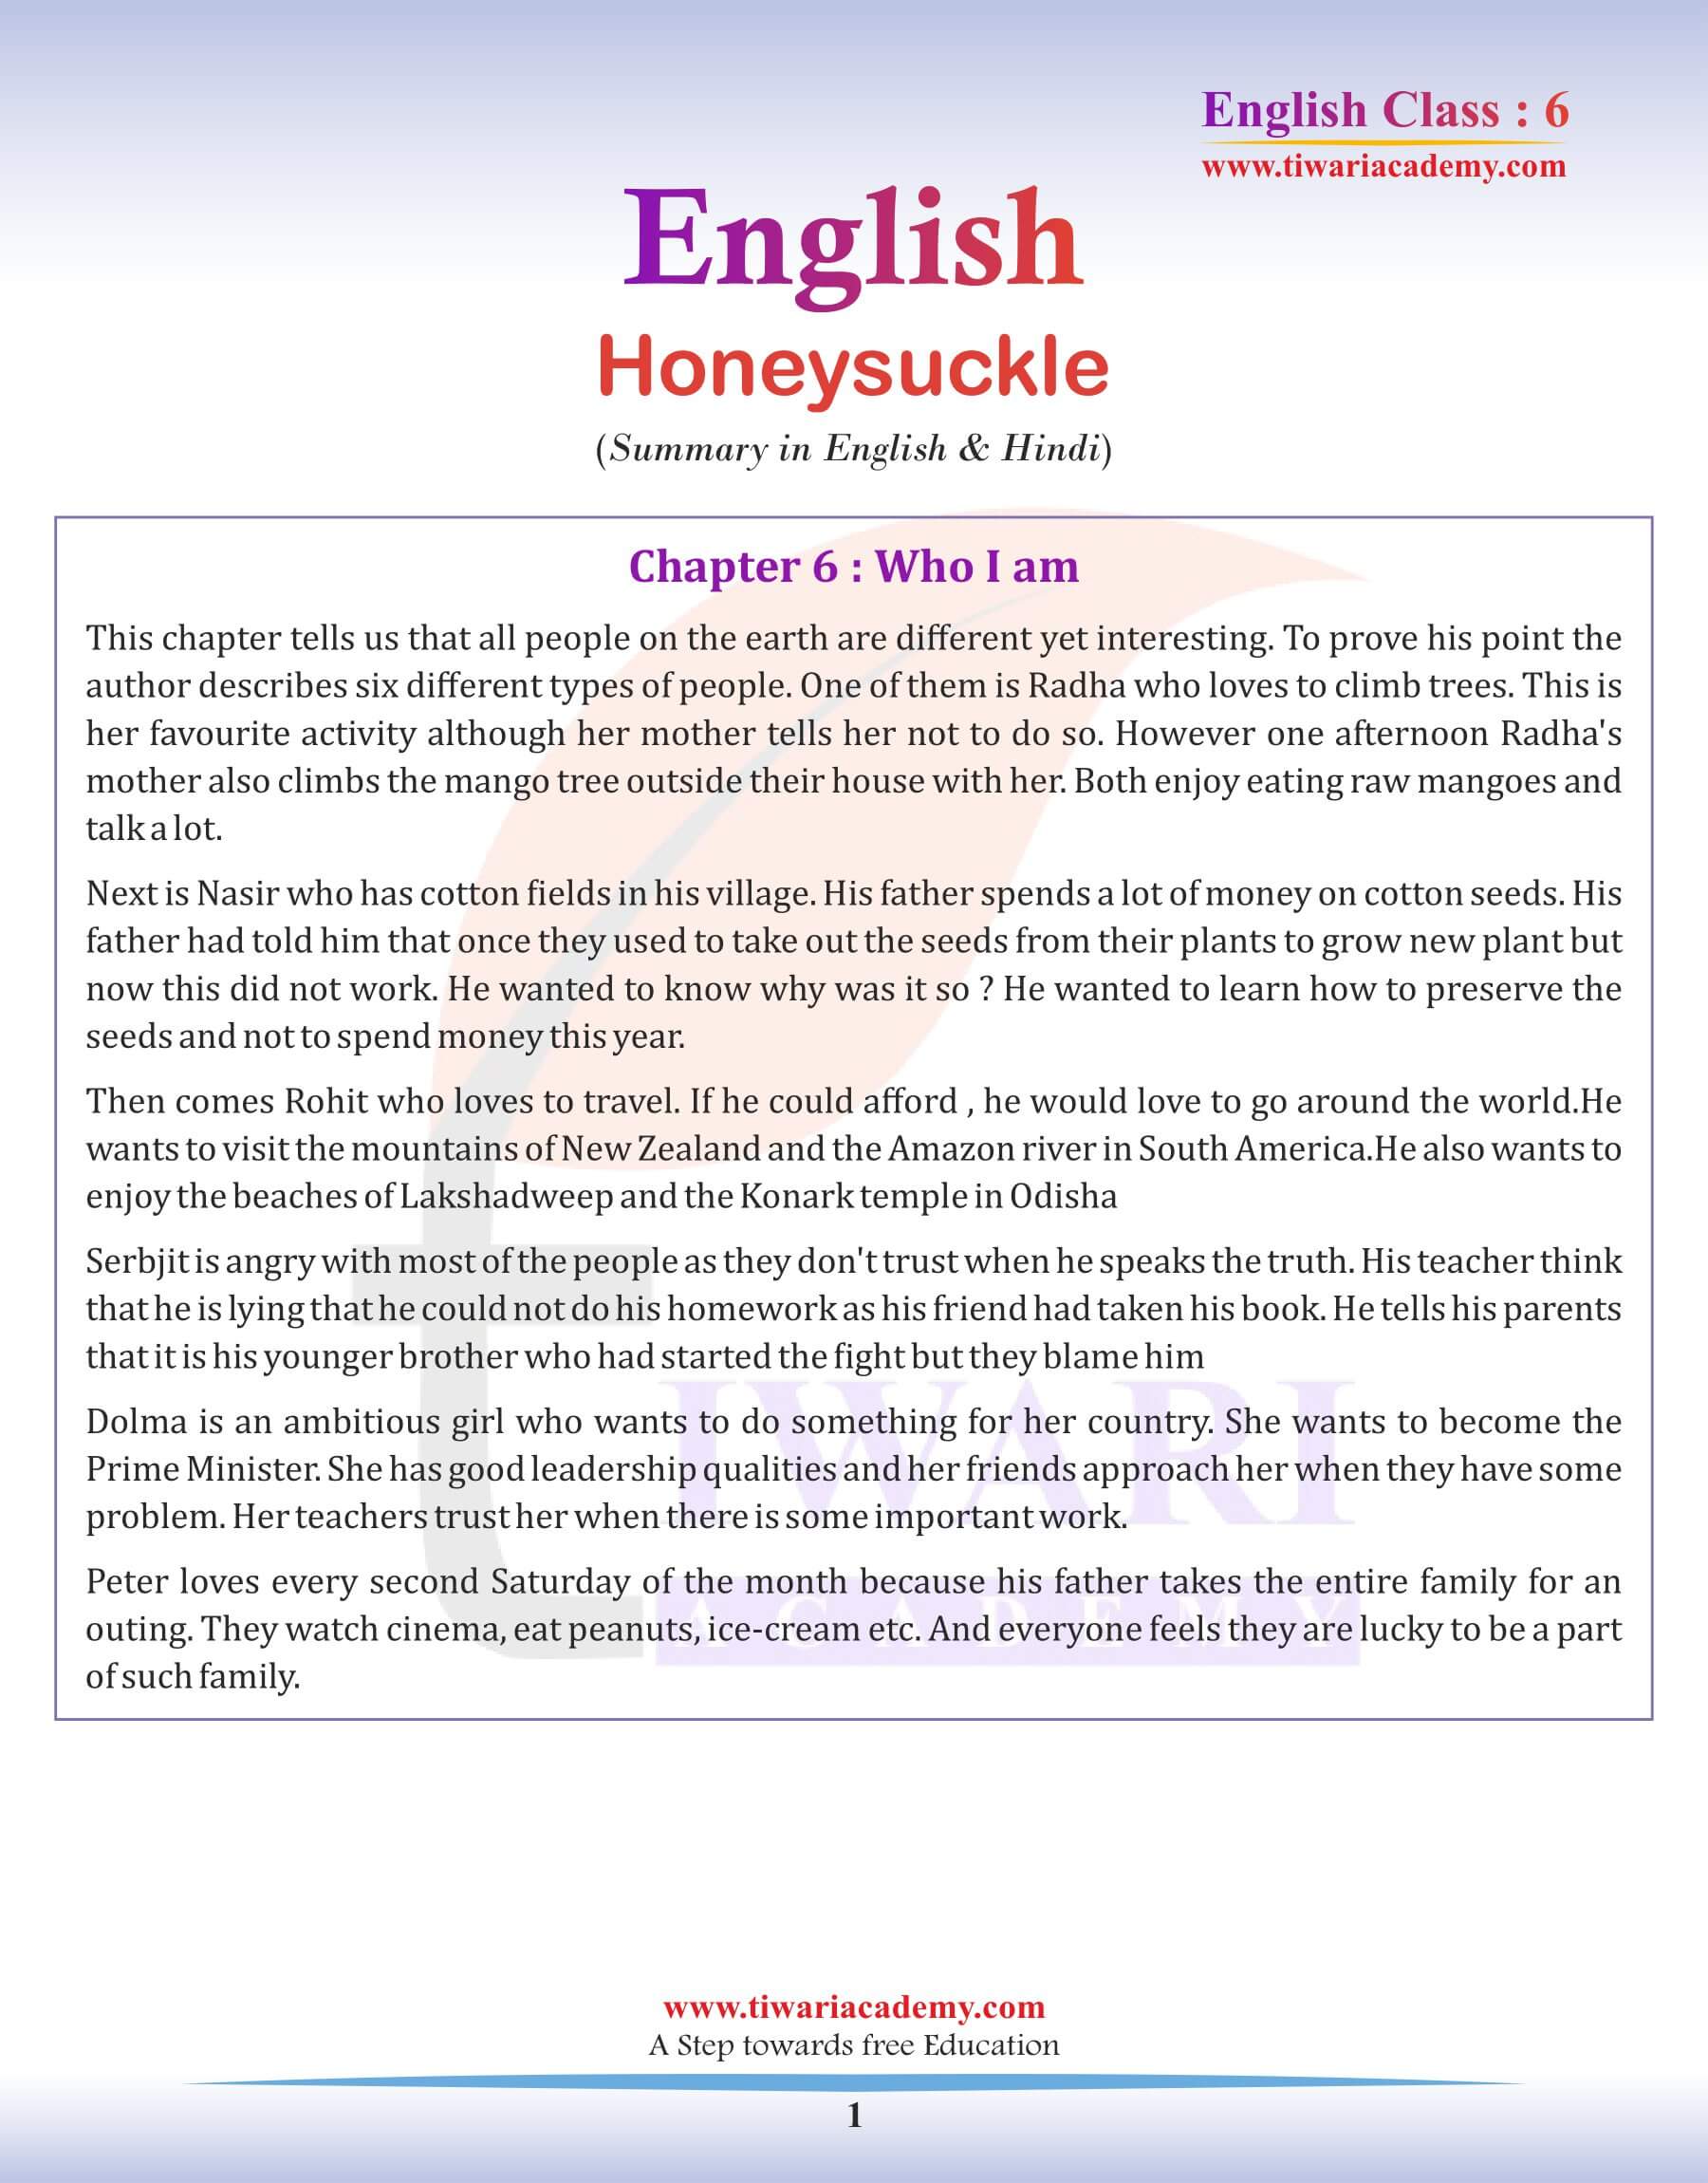 Class 6 English Chapter 6 Summary in English